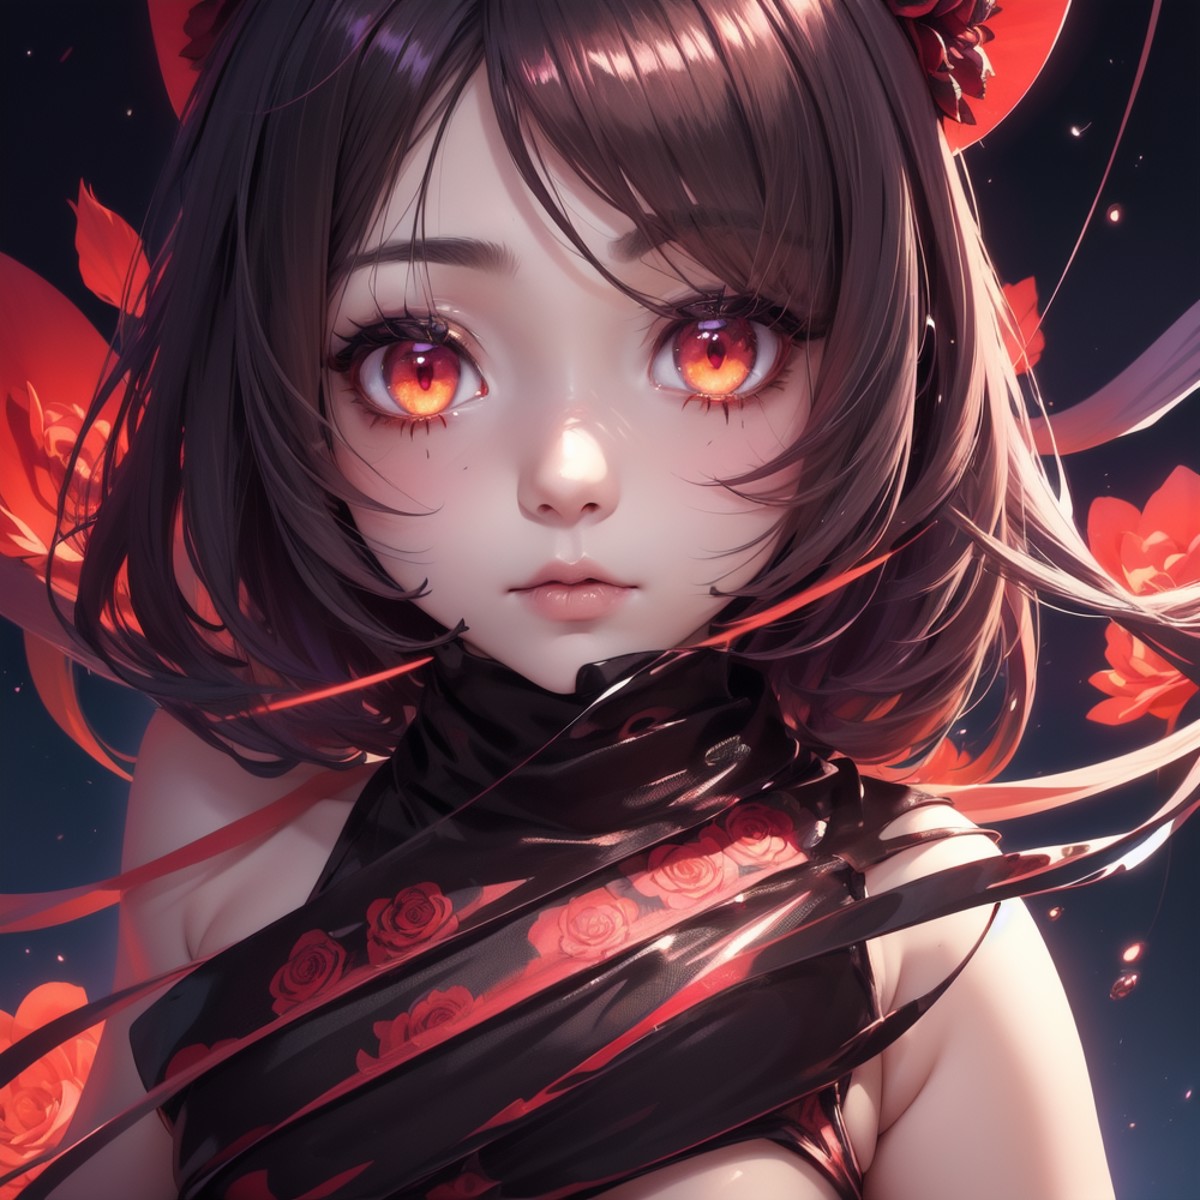 cat eye pupils iris of her eye, black red clothes, red glowing blood dripped roses, glowing flower feathers in her hair an...